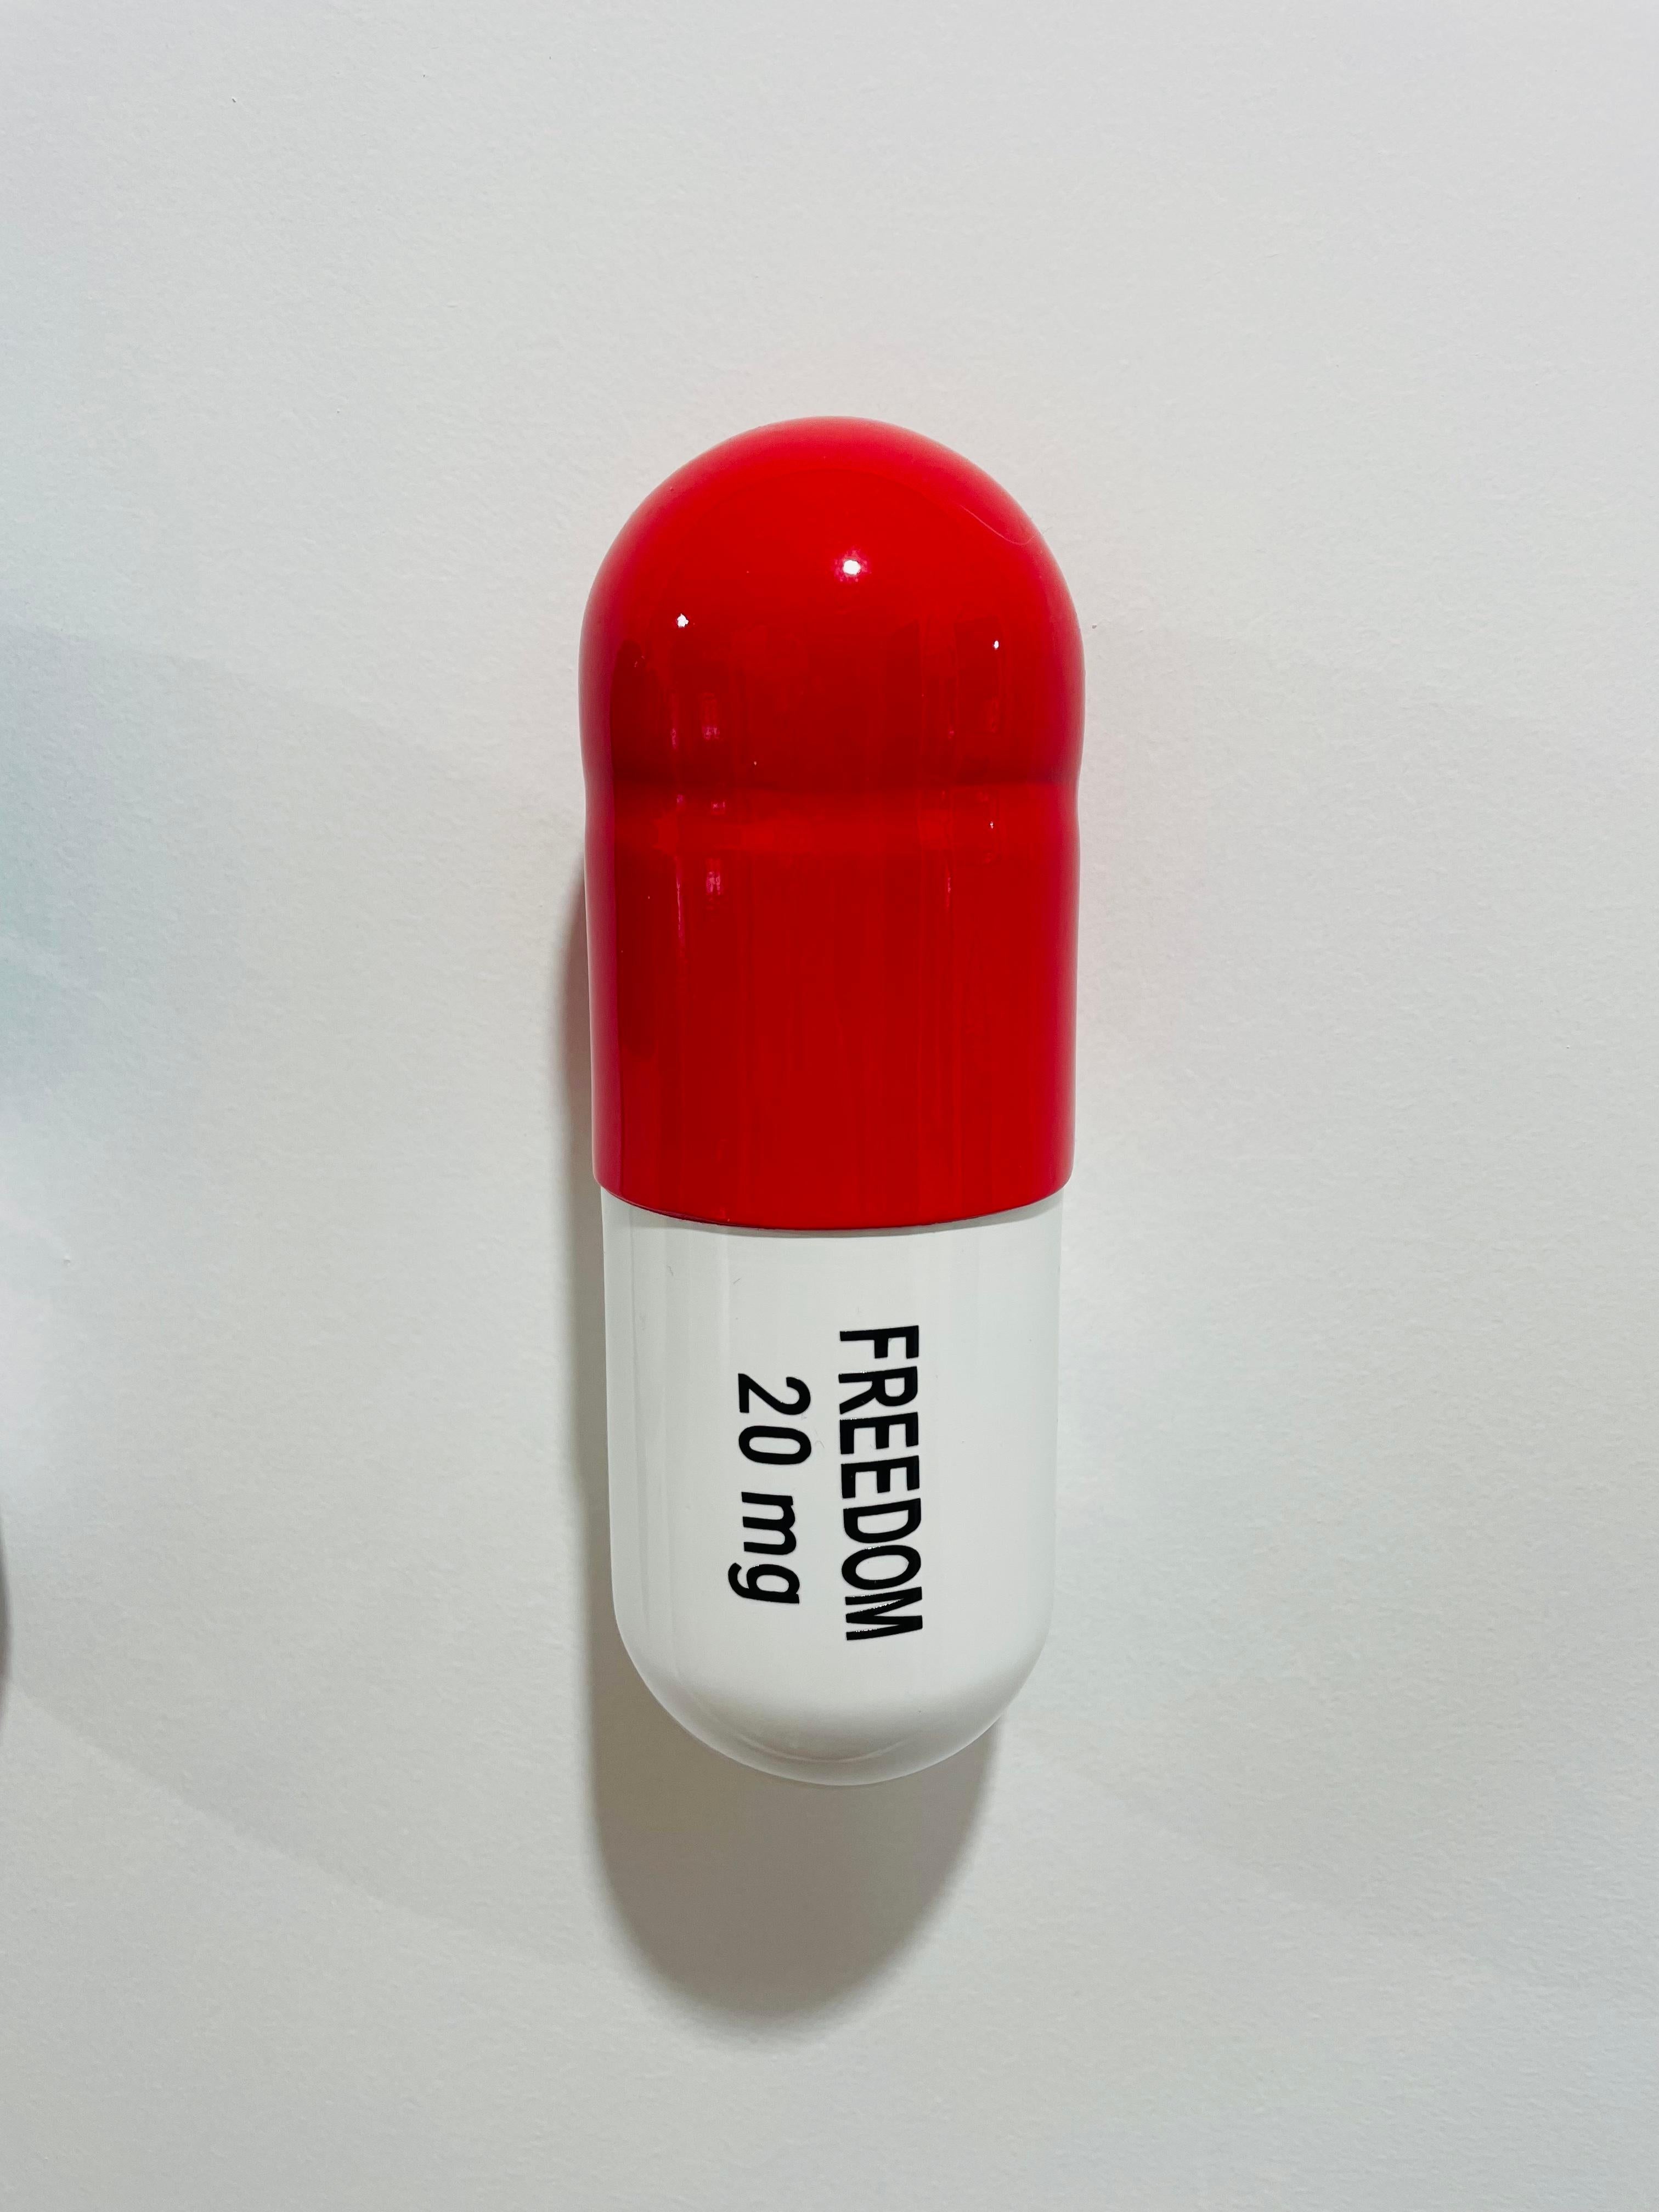 20 MG Freedom pill (white and red) - figurative sculpture